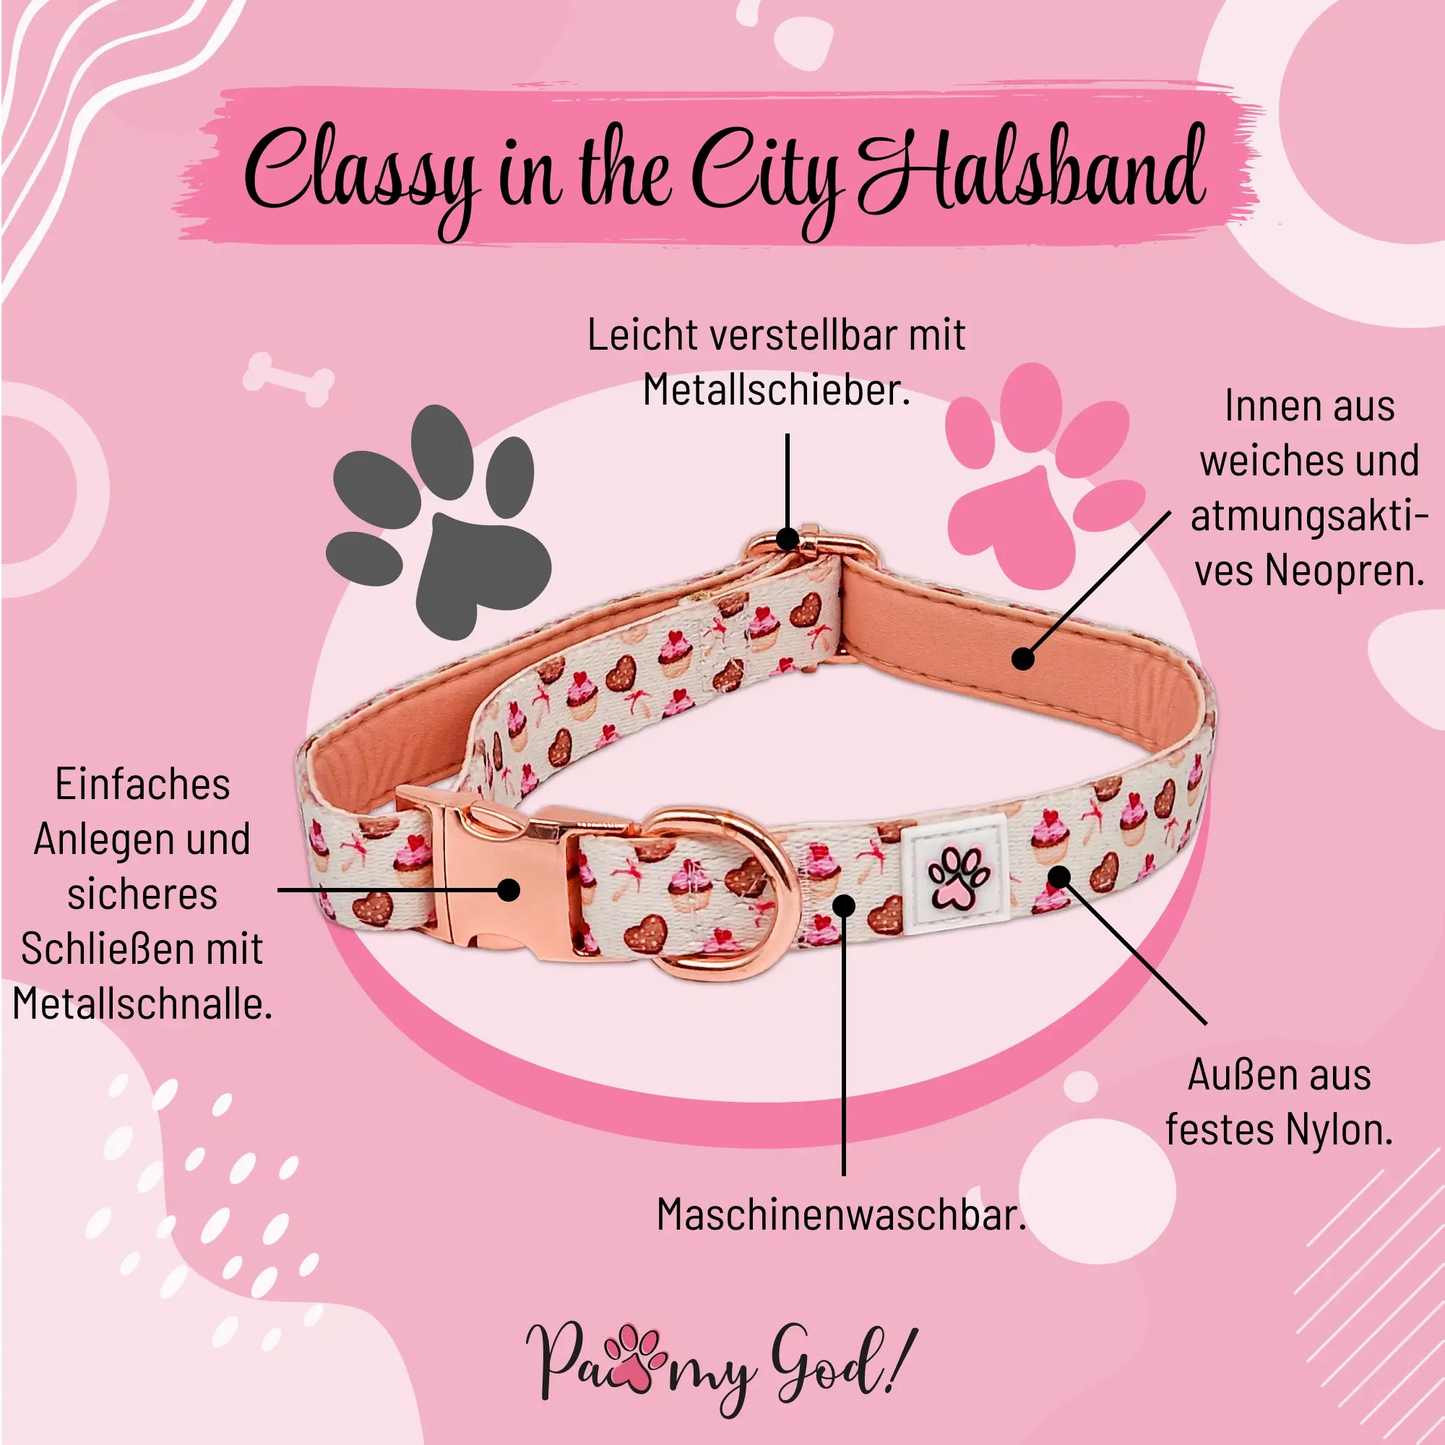 Classy in the City Cloth Collar Features